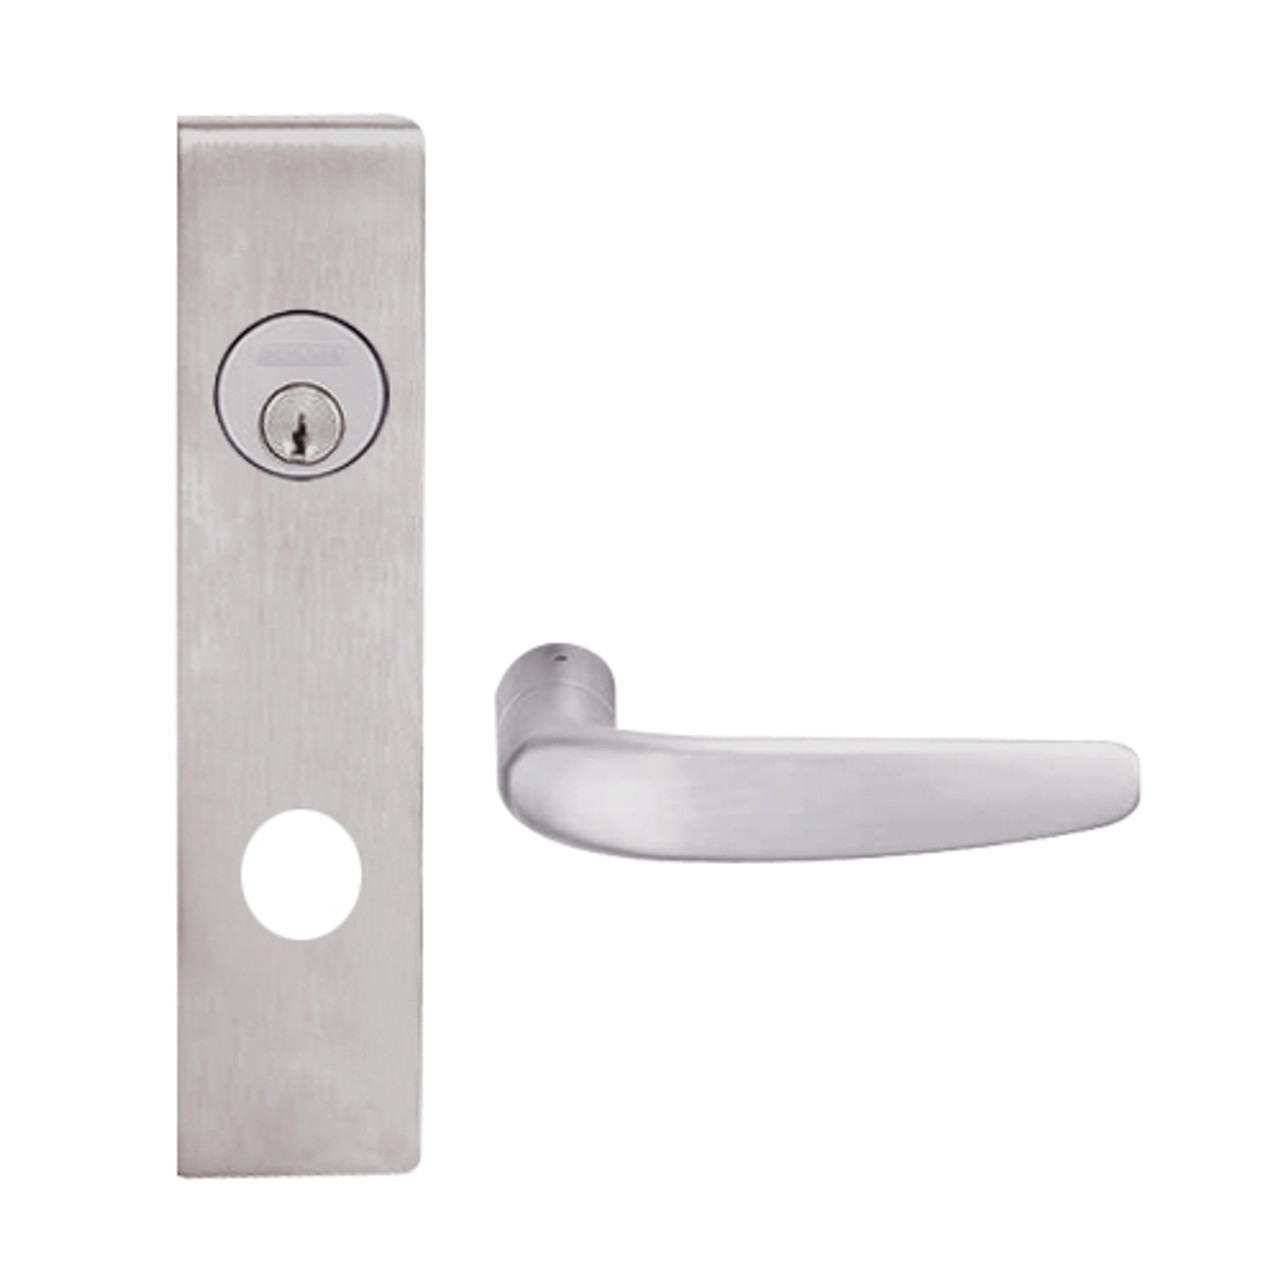 L9453L-07L-630 Schlage L Series Less Cylinder Entrance with Deadbolt Commercial Mortise Lock with 07 Cast Lever Design in Satin Stainless Steel